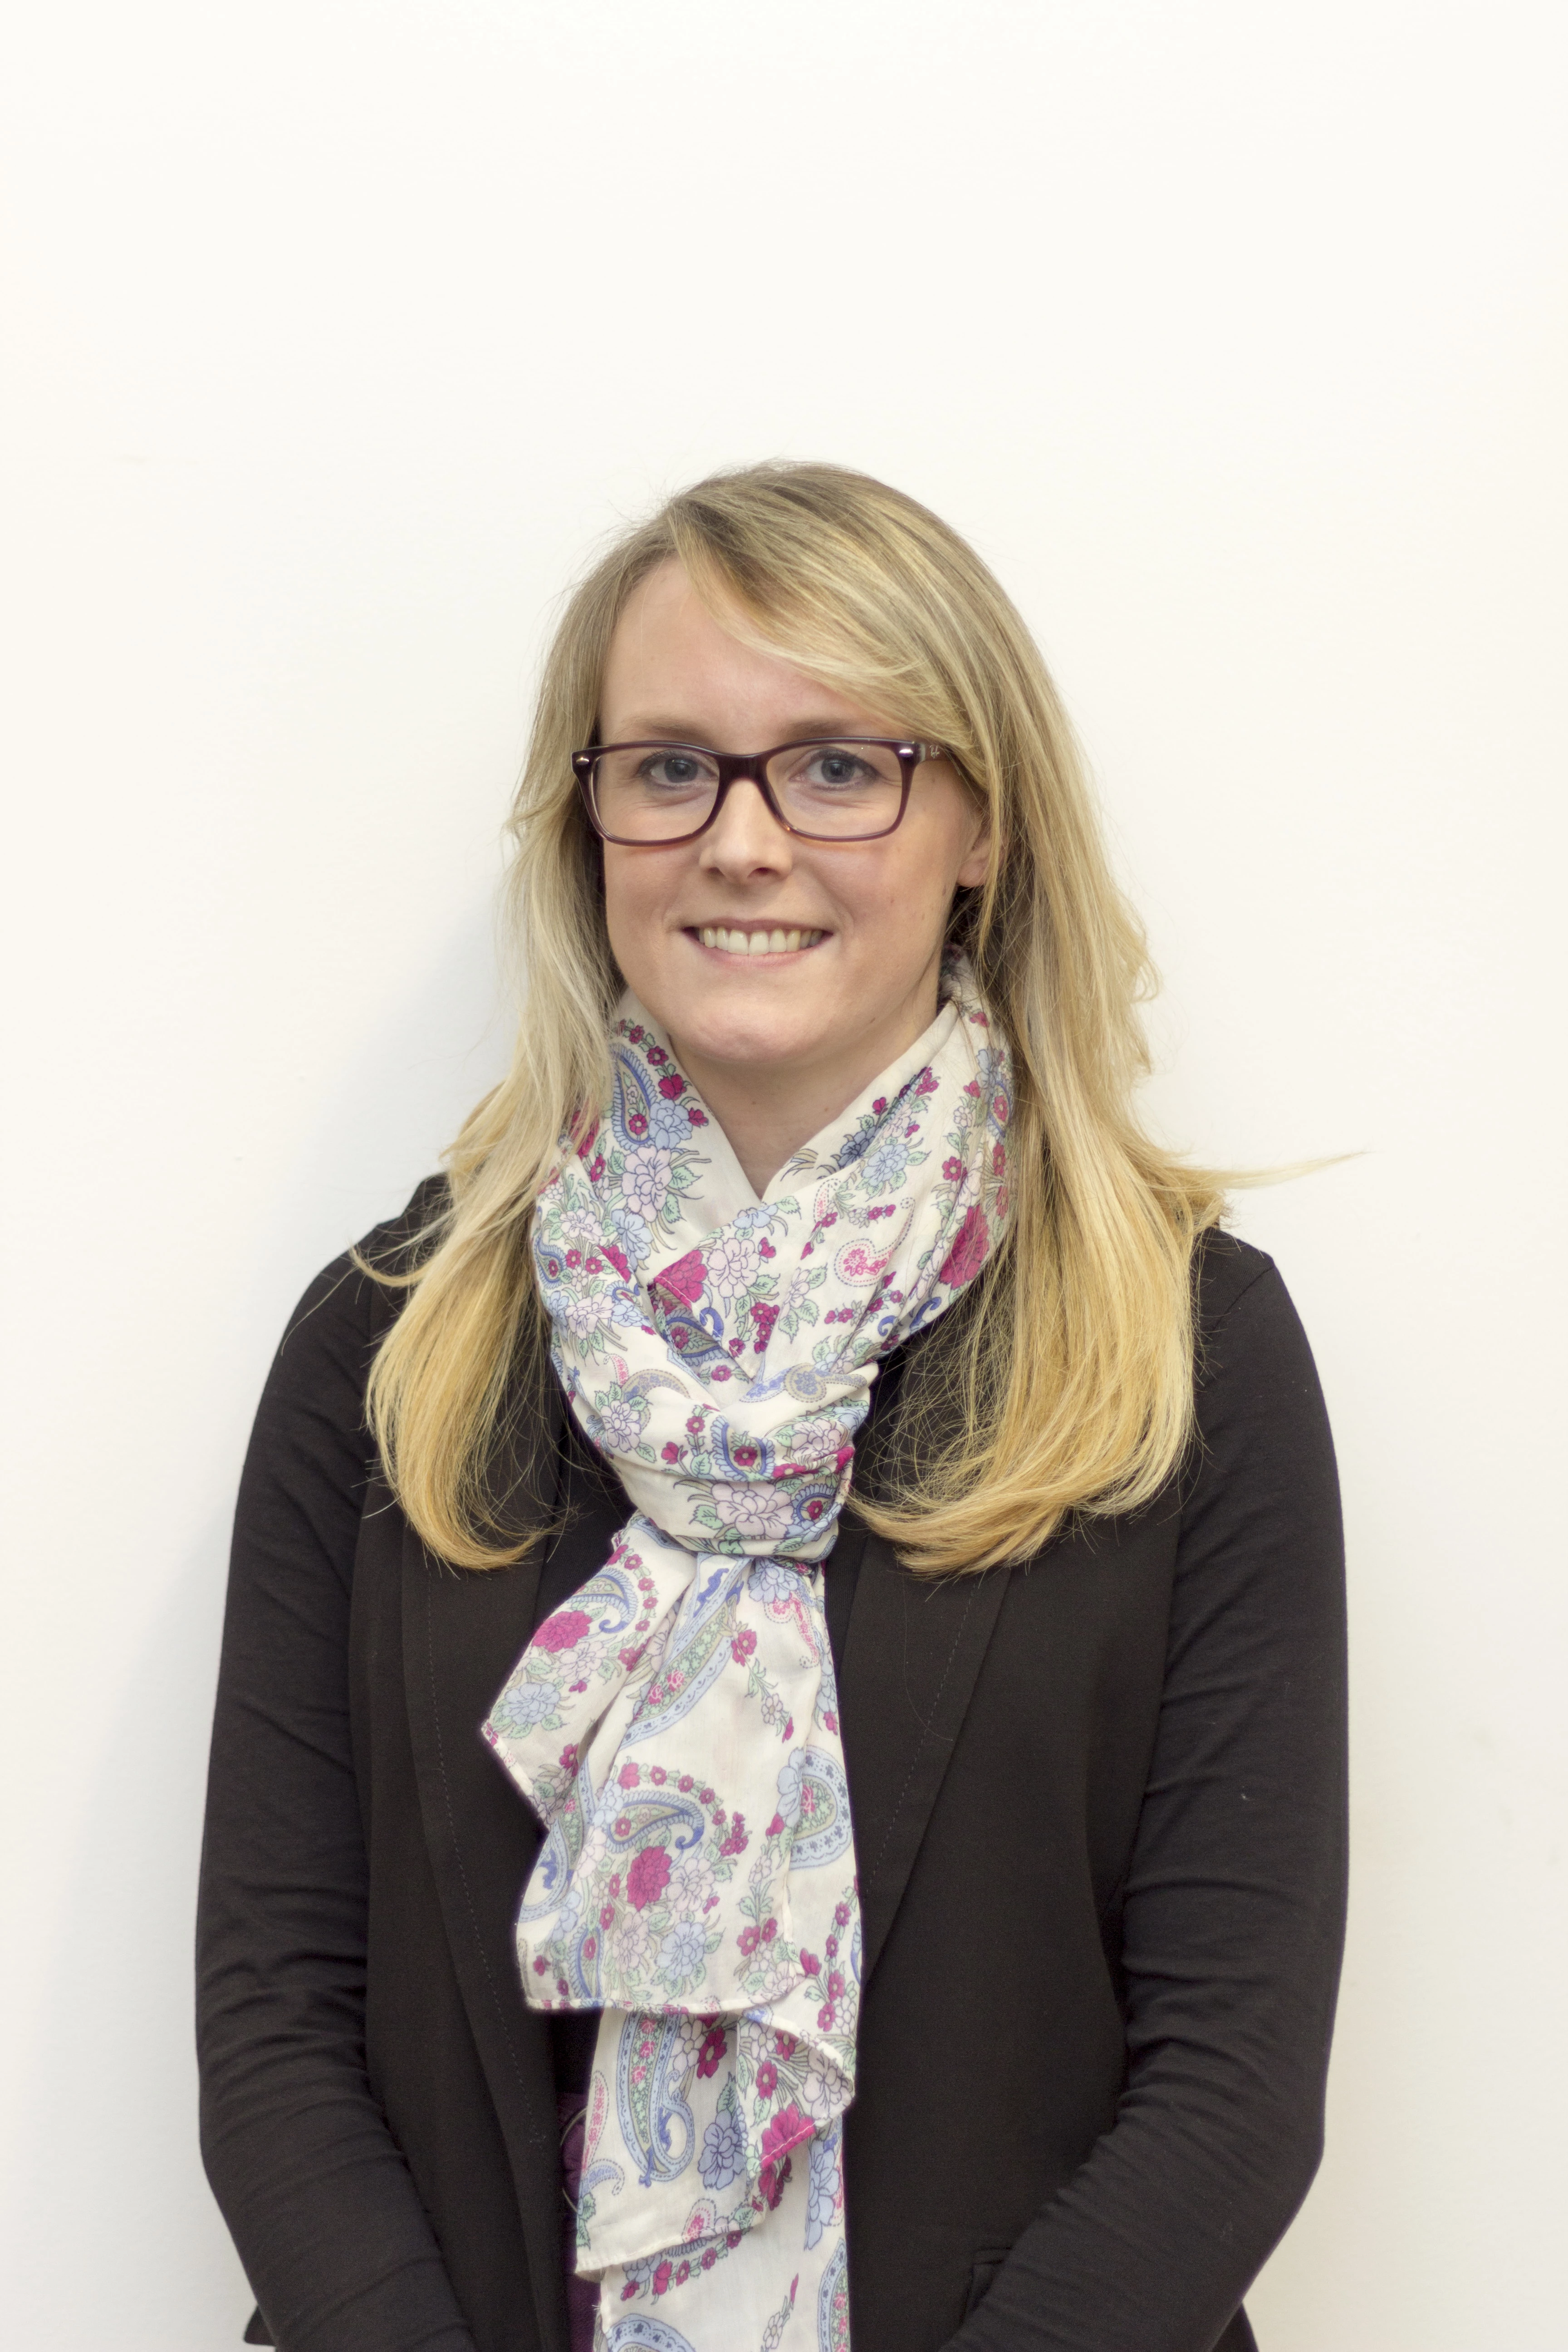 Hannah Jones, Group Head of Investment at First Ark